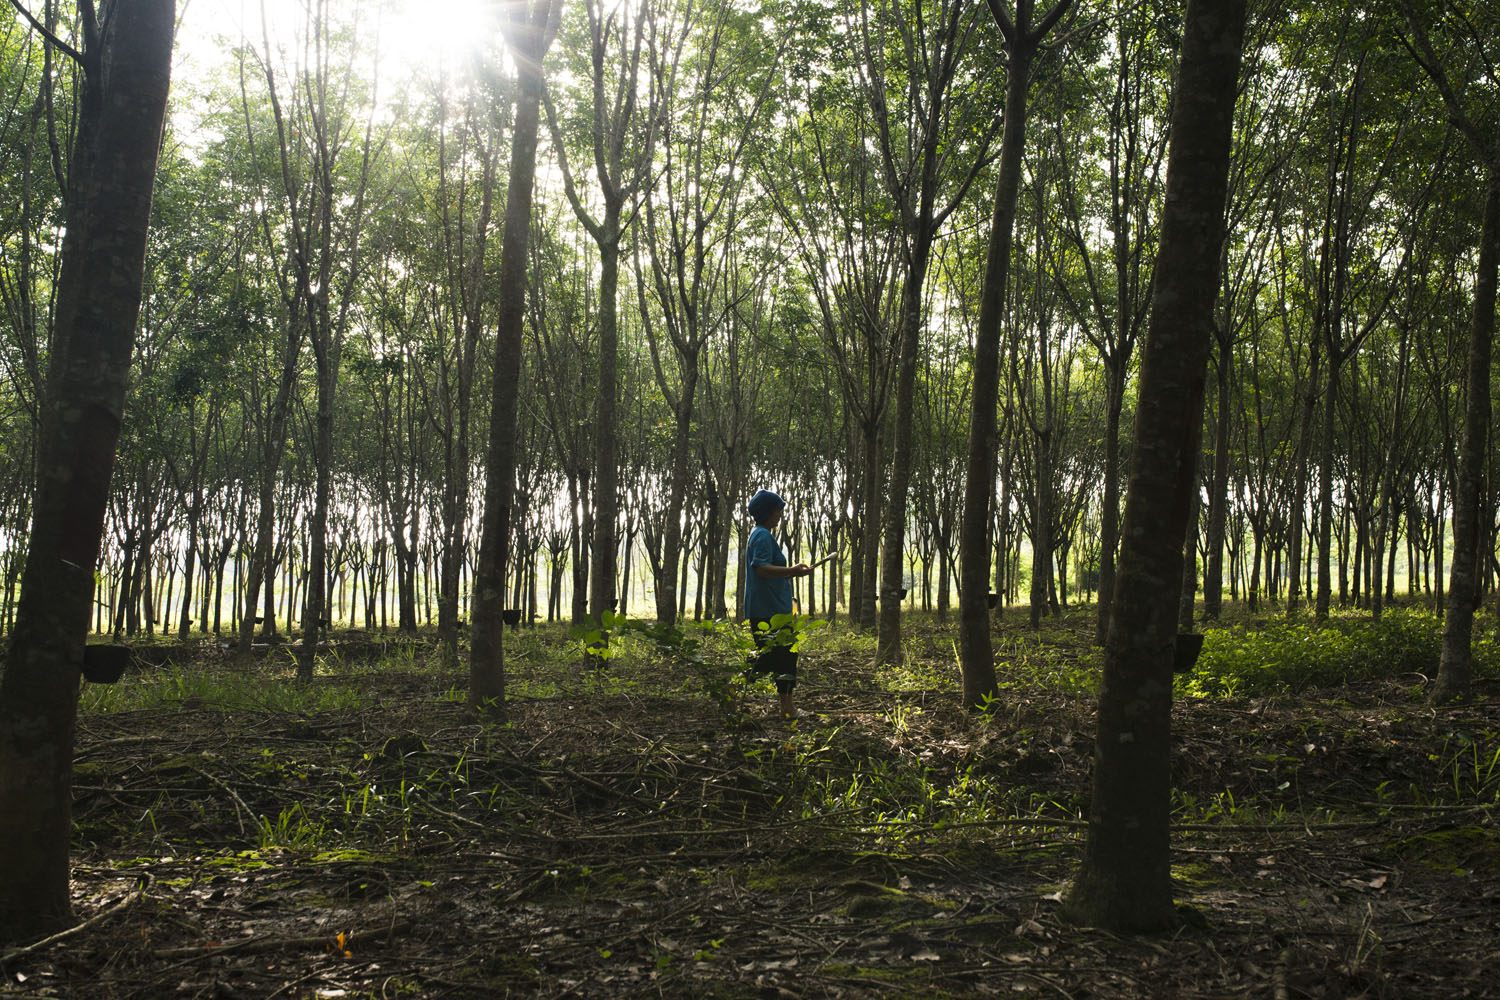 A rubber farmer tends her crop of trees in the early morning. The vast majority of people here own rubber plantations and need to harvest the trees’ latex at a time when elephants are most active.